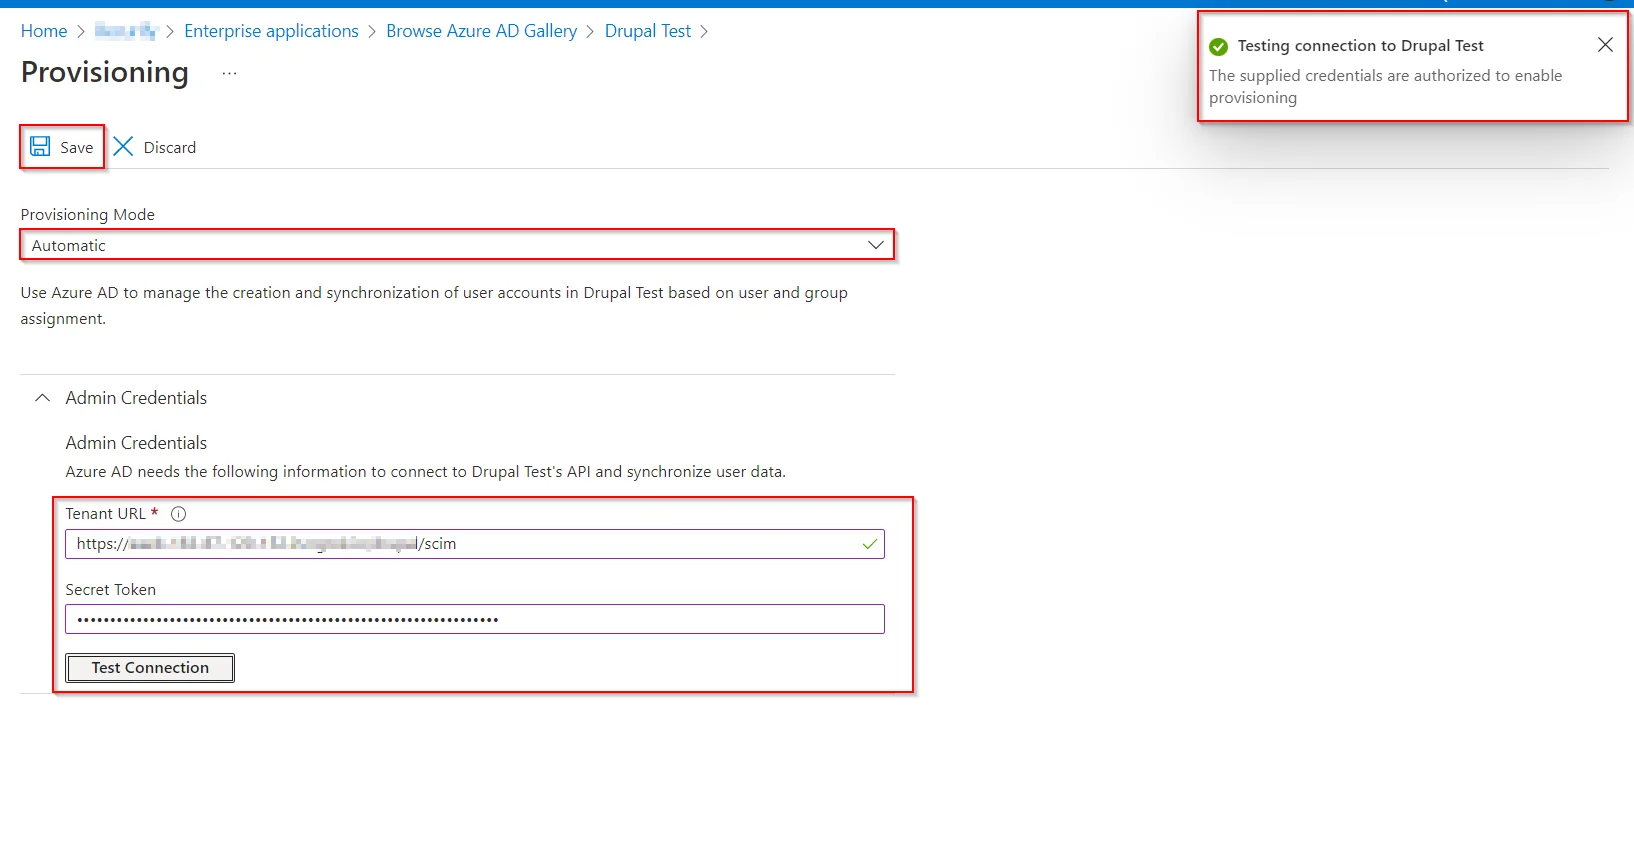 Microsoft Azure AD User Provisioning and Sync - Show success message